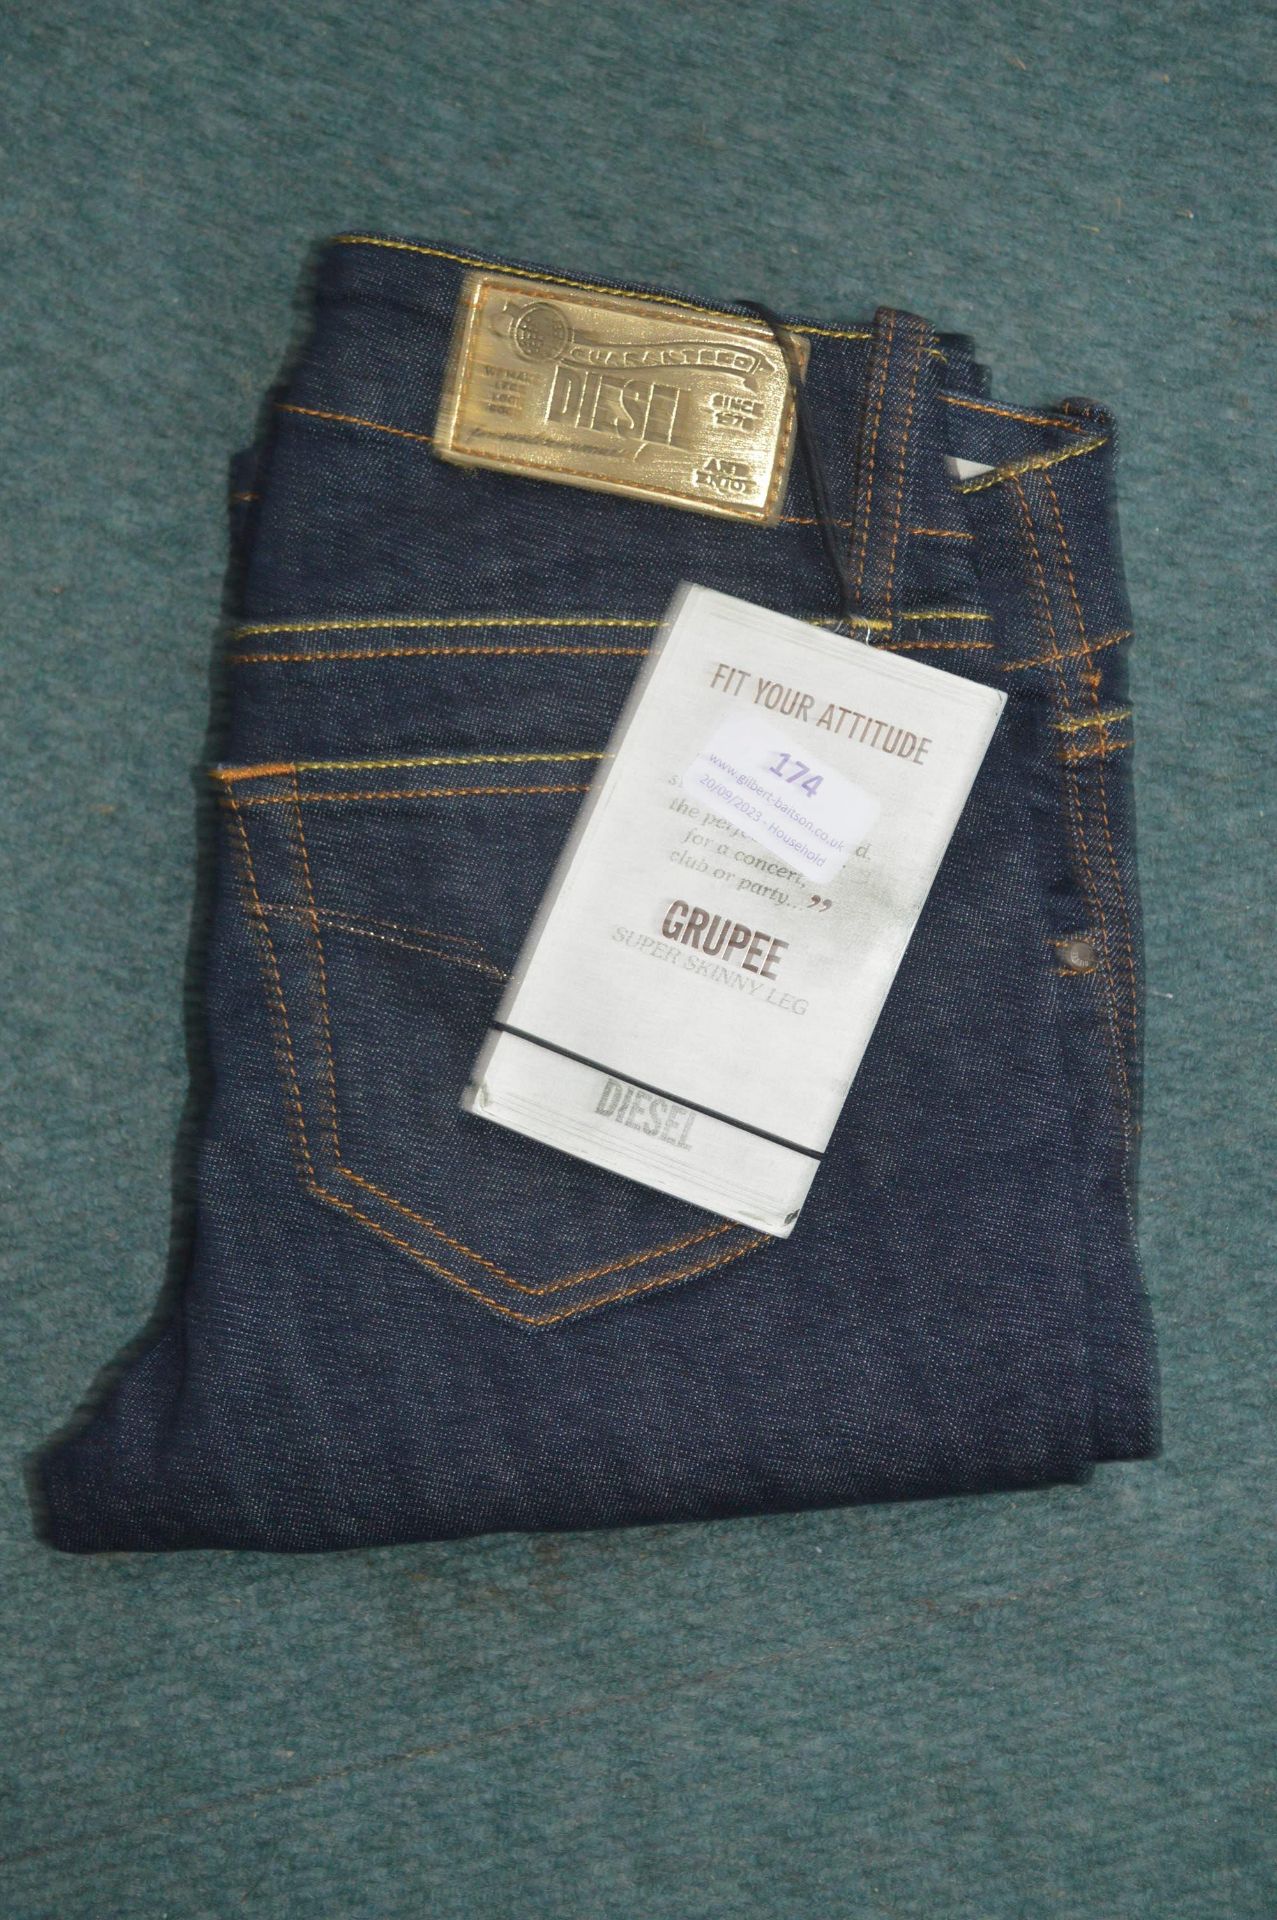 Diesel Groupee Super Skinny Jeans Size: 24x30 - Image 2 of 2